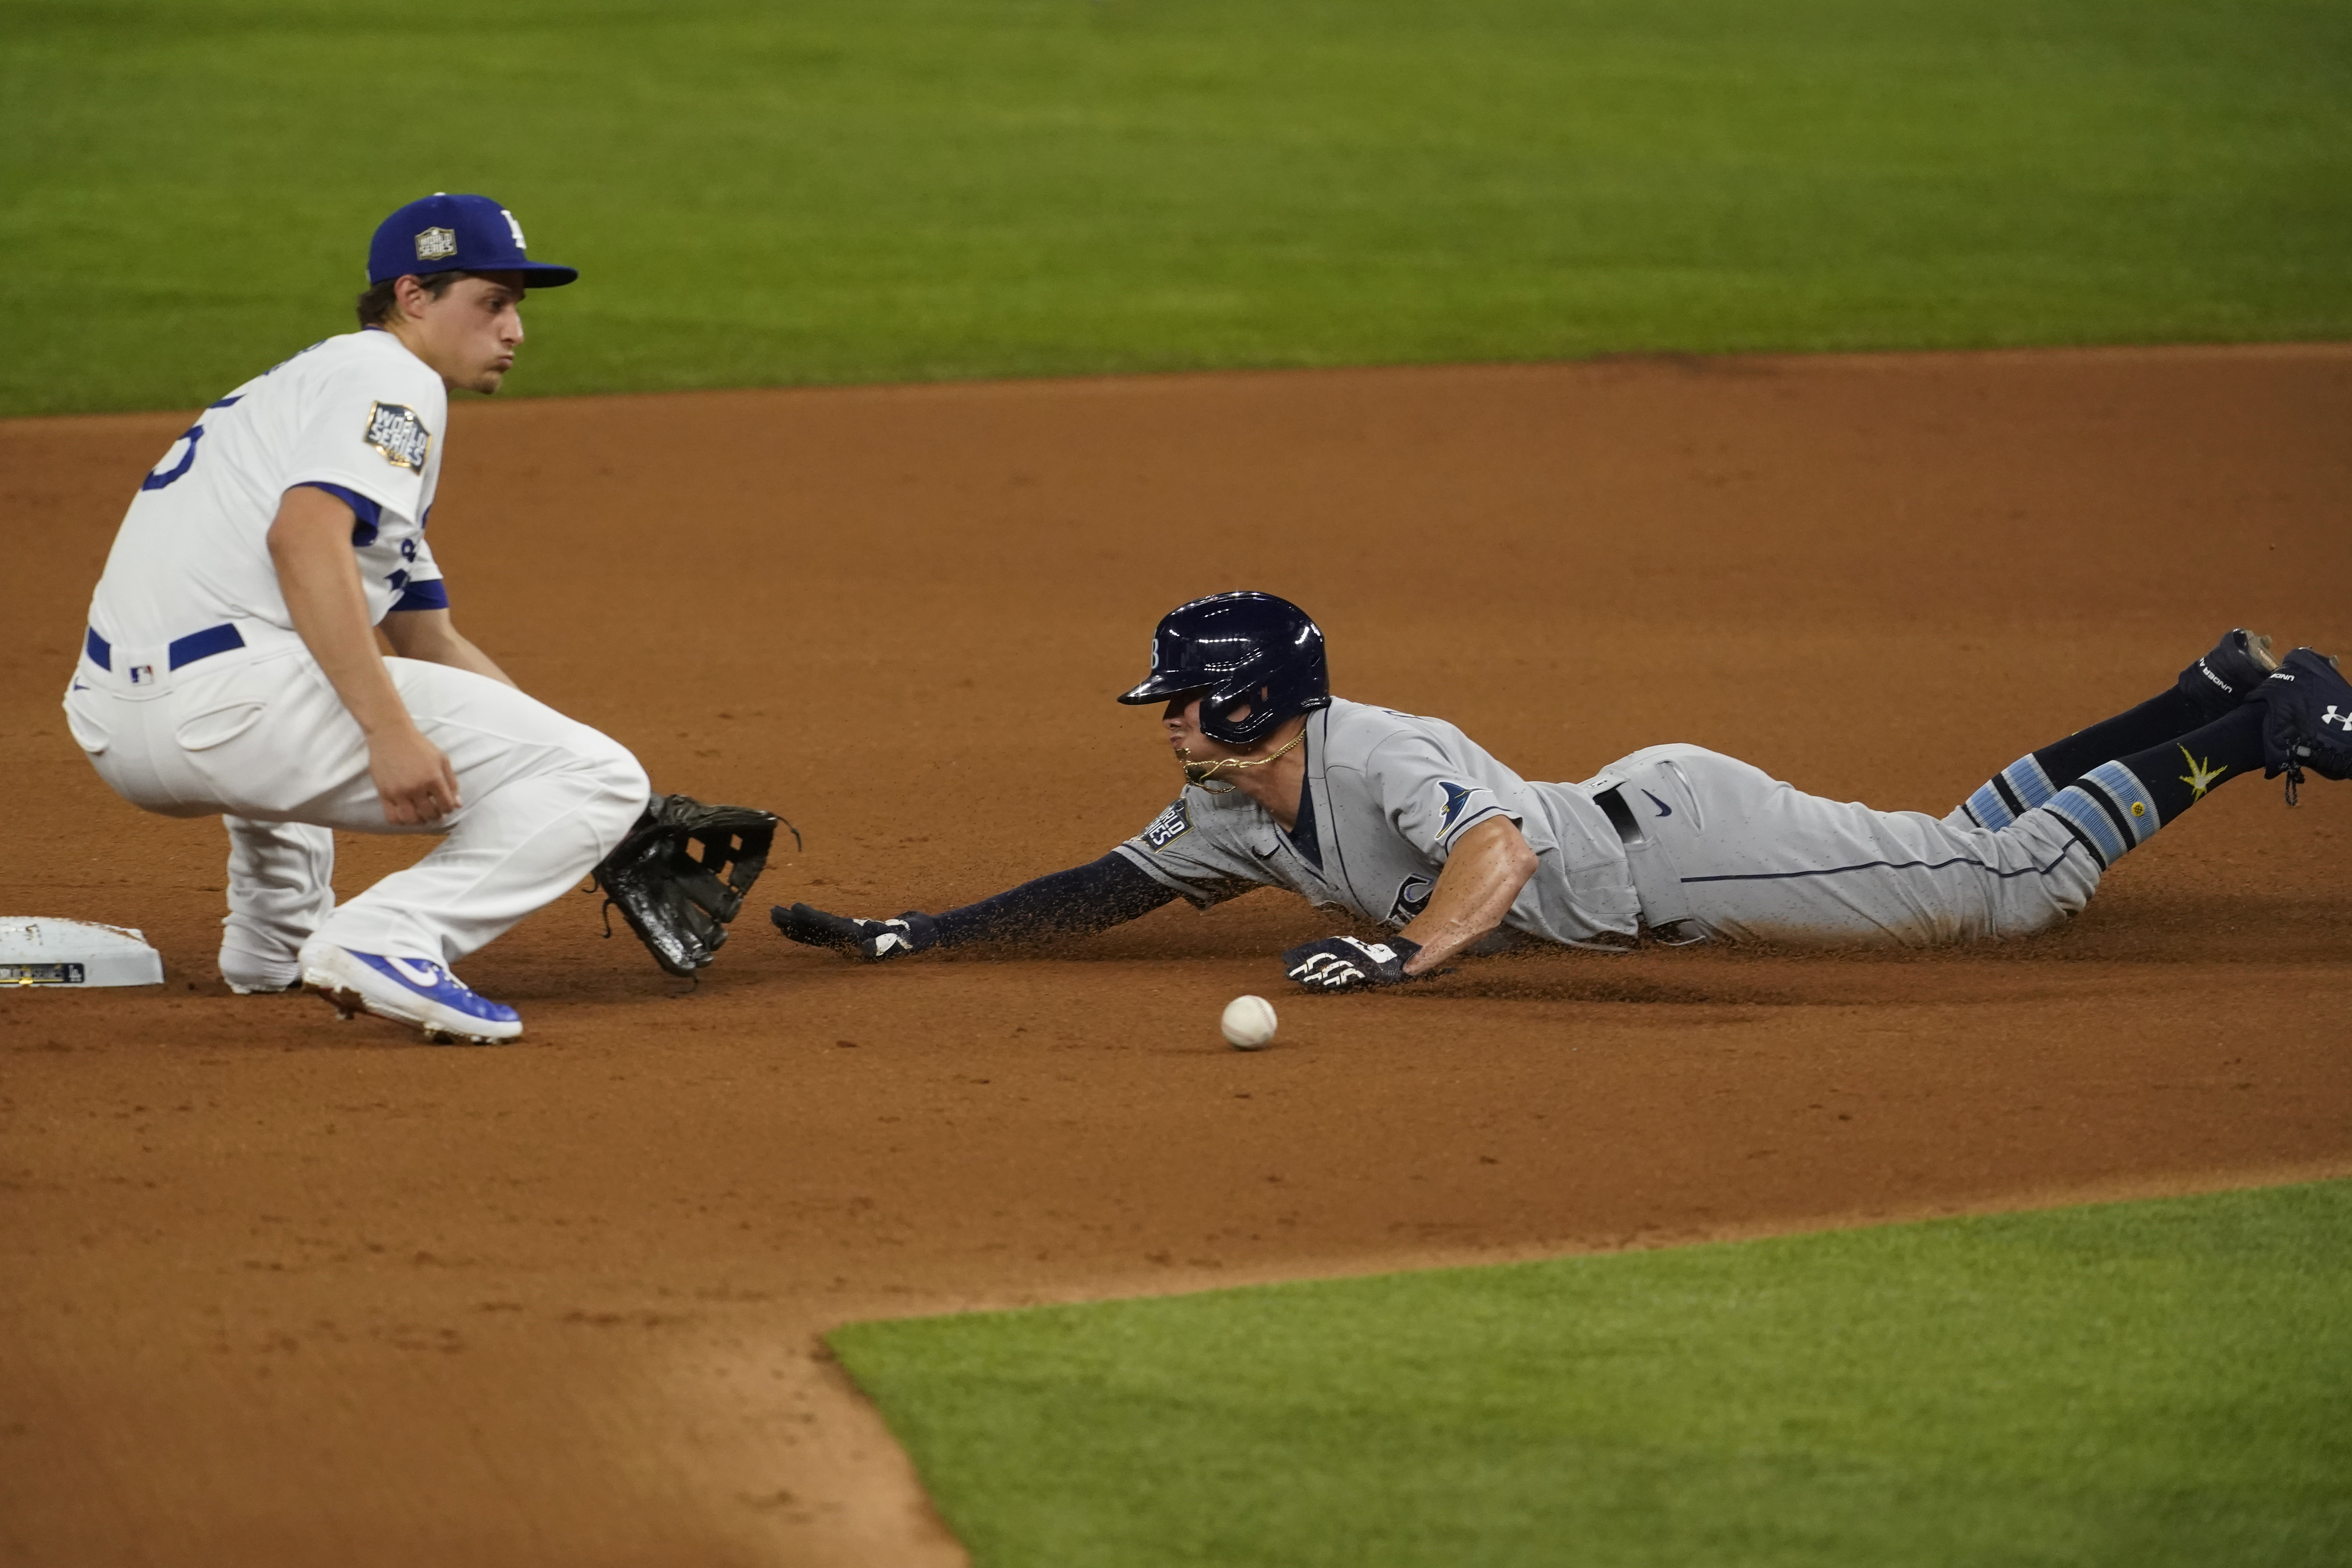 How to watch Los Angeles Dodgers vs